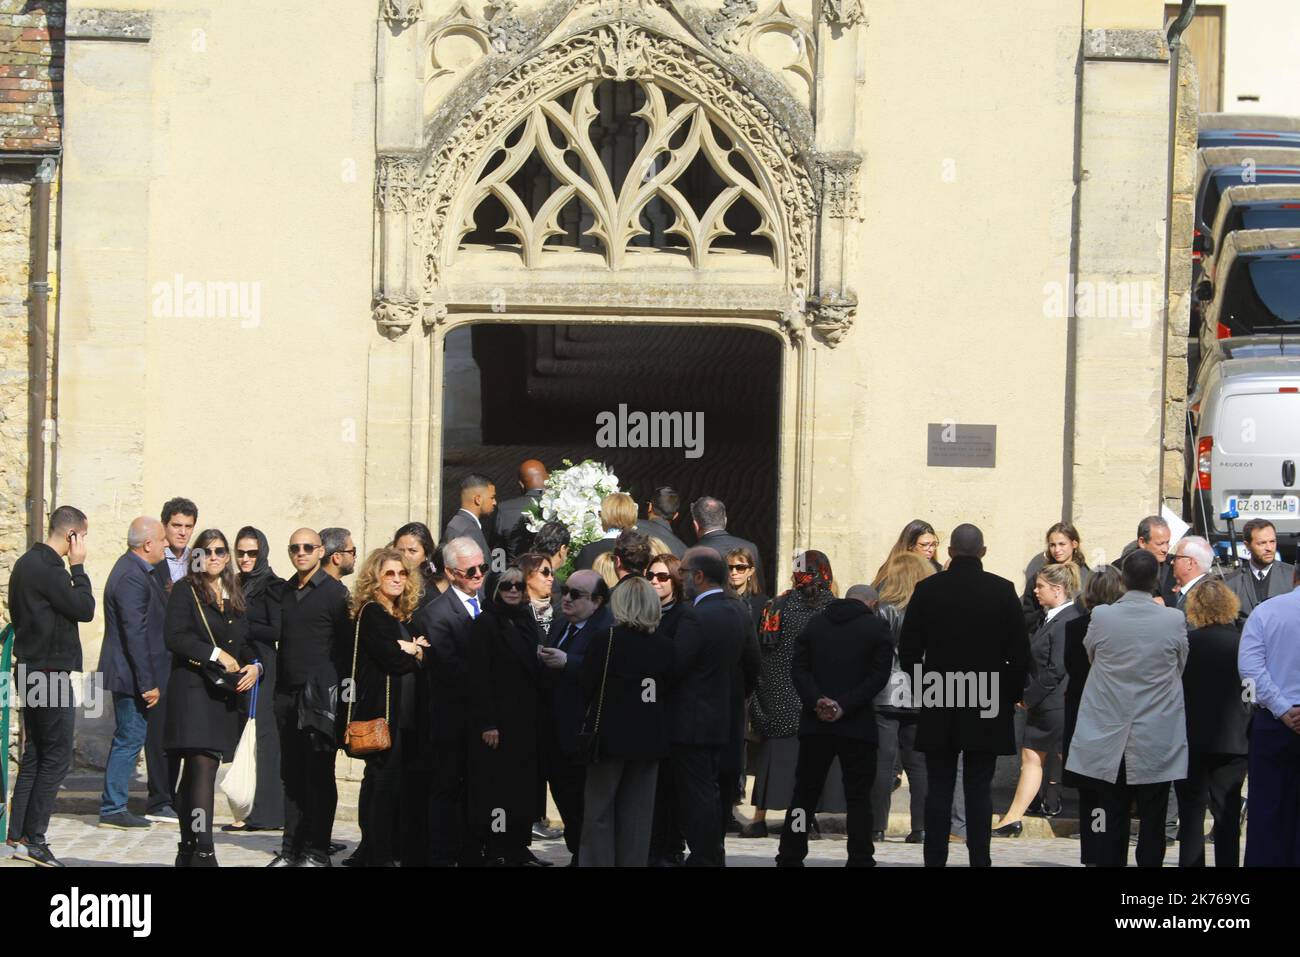 Funeral of Charles Aznavour. French singer, songwriter and actor Charles Aznavour, passed away last night at 94.   The funeral of Charles Aznavour at the Armenian Cathedral of St. John the Baptist in Paris and Montfort-l'Amaury Cemetery in the department of Yvelines, France Stock Photo